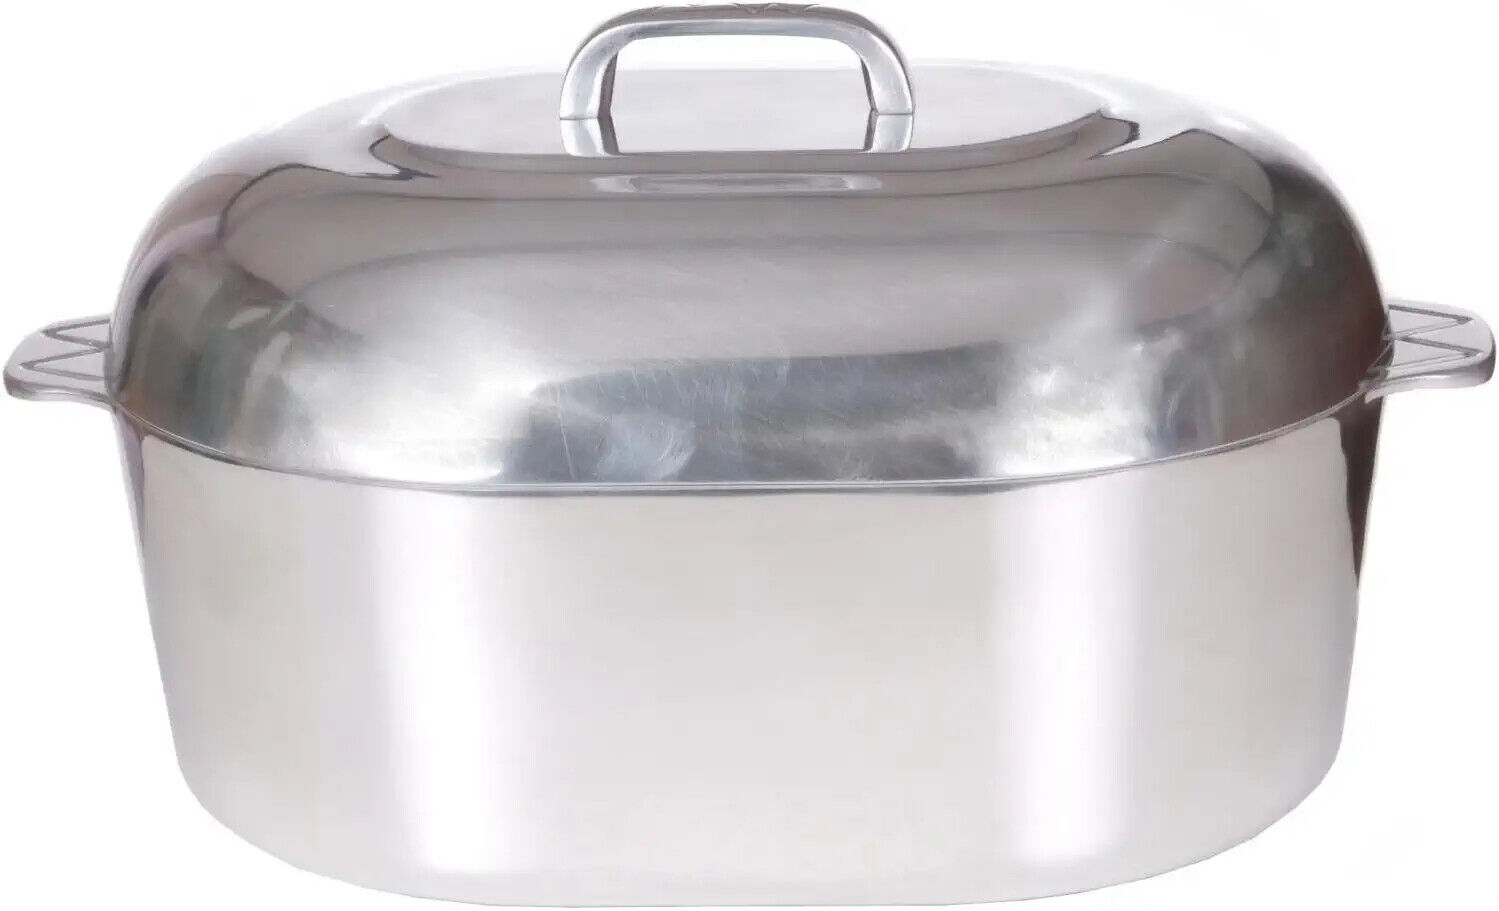 McWare Cast Aluminum 18-Inch Oval Roaster (same as Magnalite) *NEW *AUTHENTIC